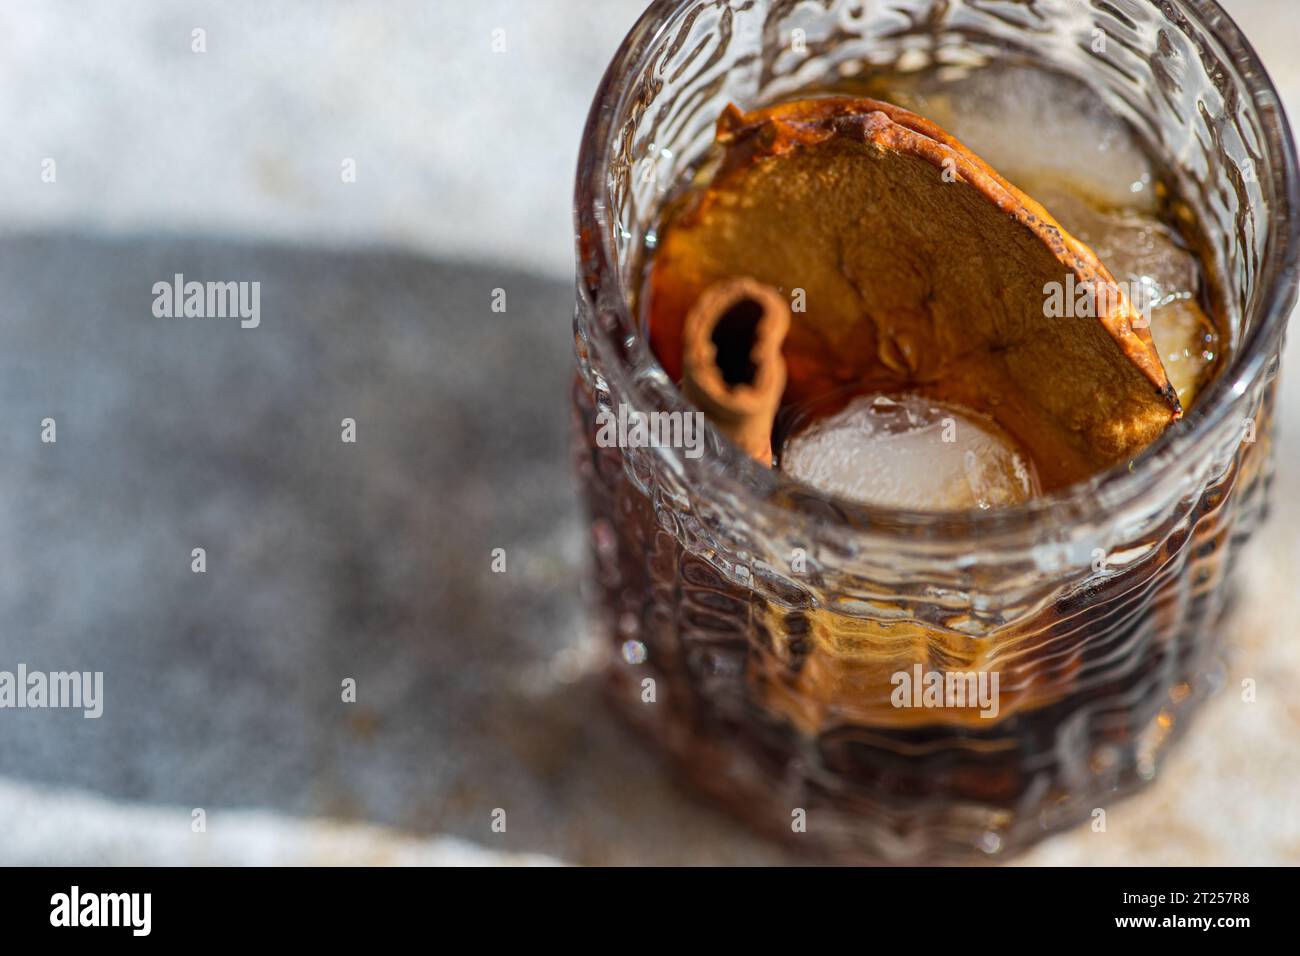 Apple cider cocktail with dried apple slices and a cinnamon stick Stock Photo